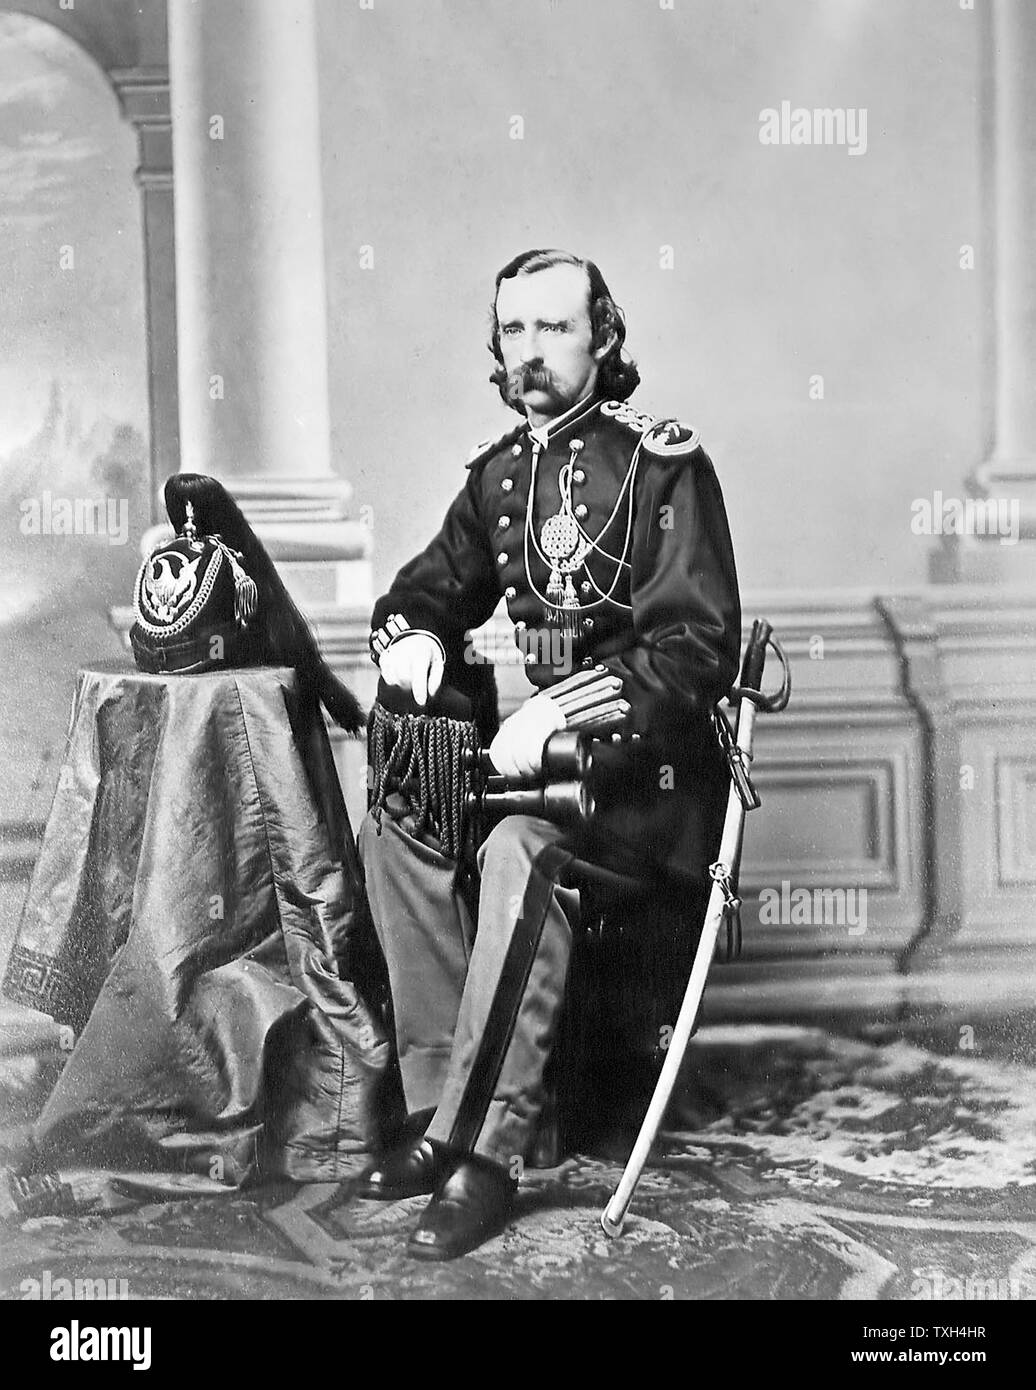 George Armstrong Custer, United States Army officer and cavalry commander in American Civil War and Indian Wars. Defeated and killed at Battle of Little Bighorn Stock Photo